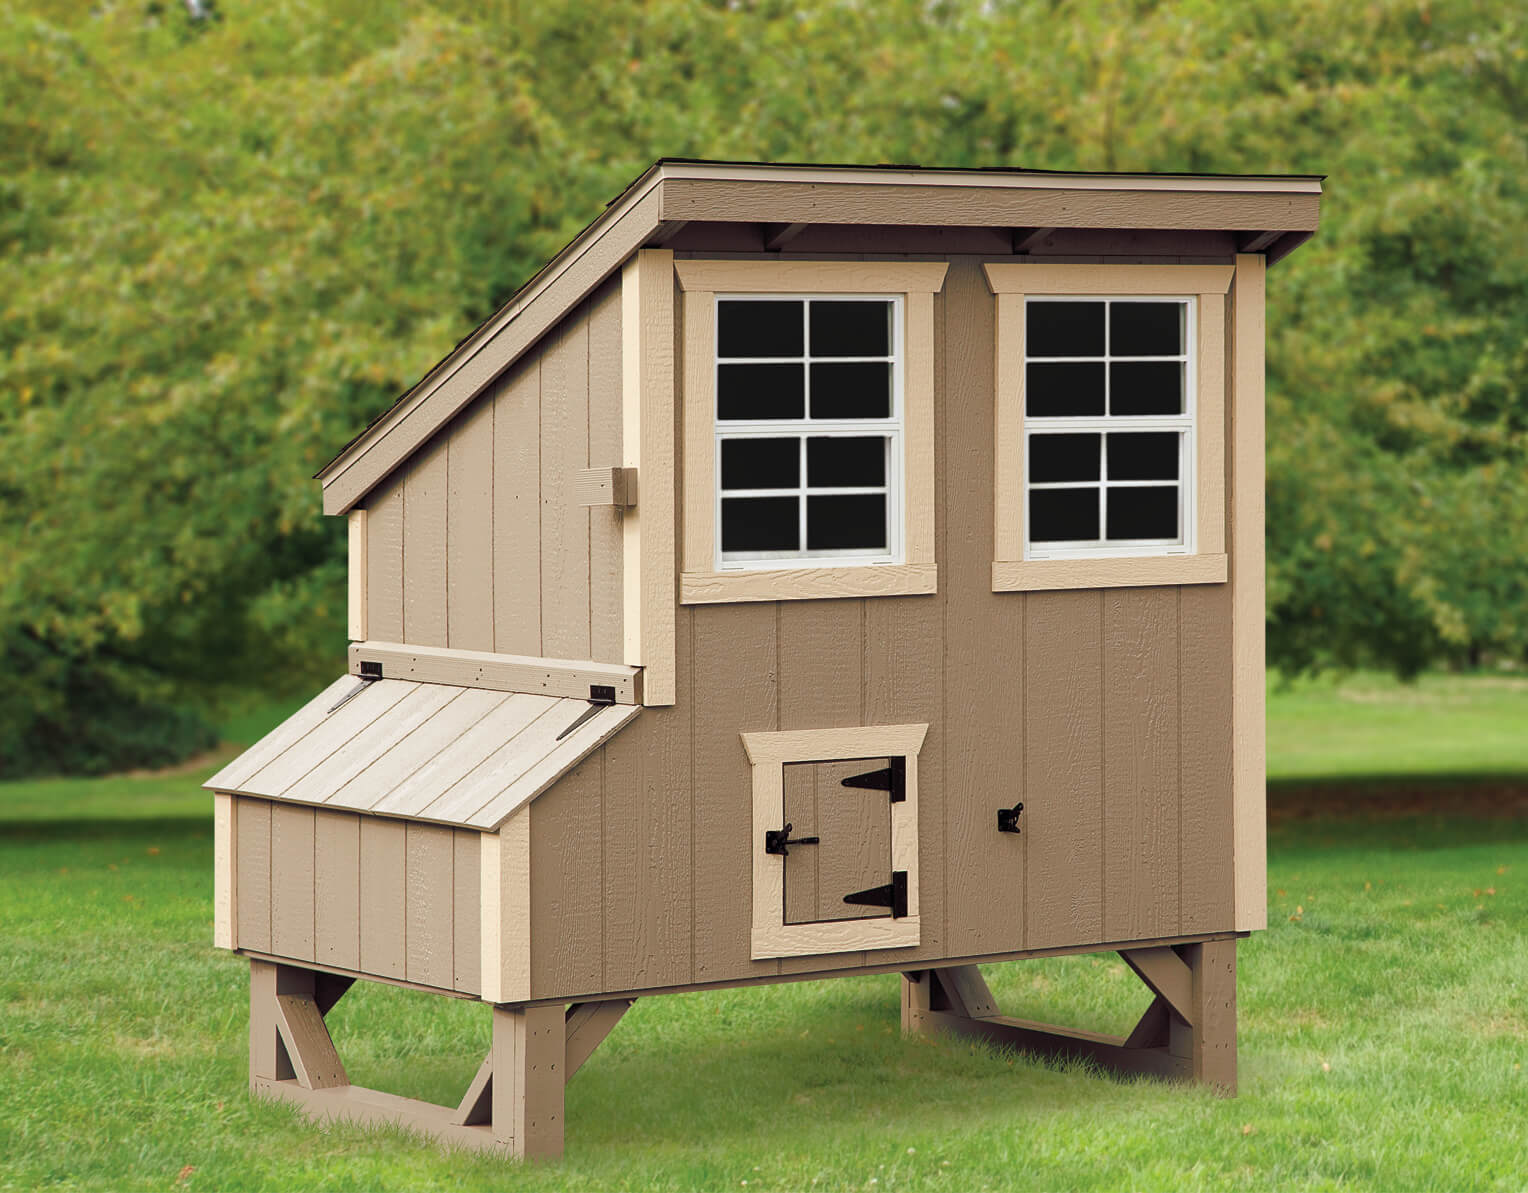 Exterior of a 4x5 Lean-To chicken coop